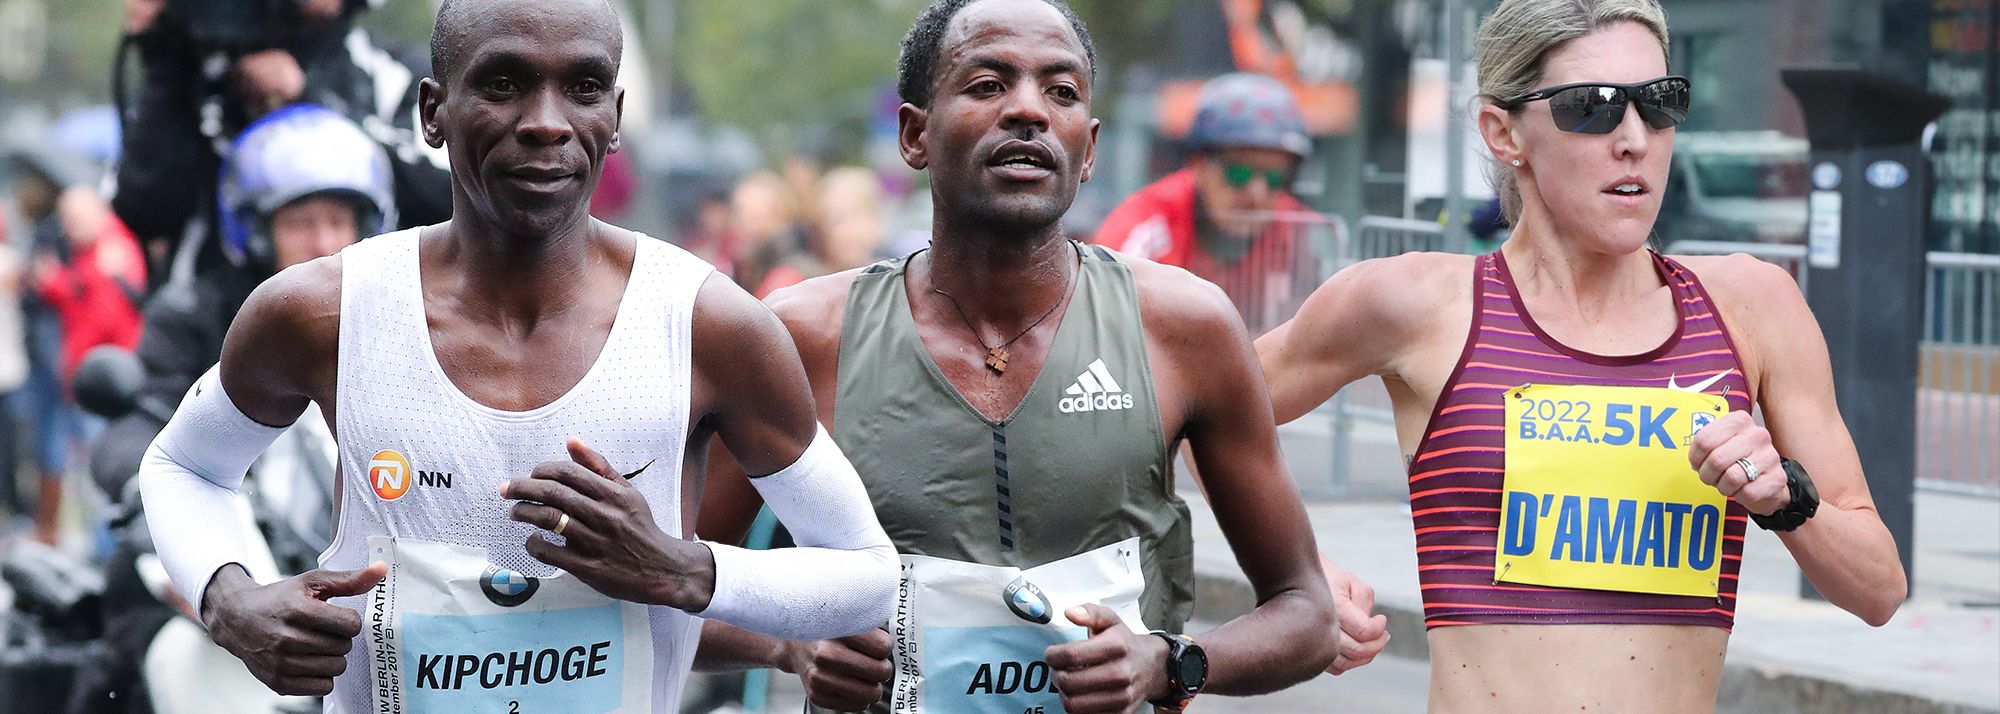 Eliud Kipchoge and Keira D'Amato will lead two top fields when they make their highly anticipated returns to the World Athletics Elite Platinum road race on Sunday